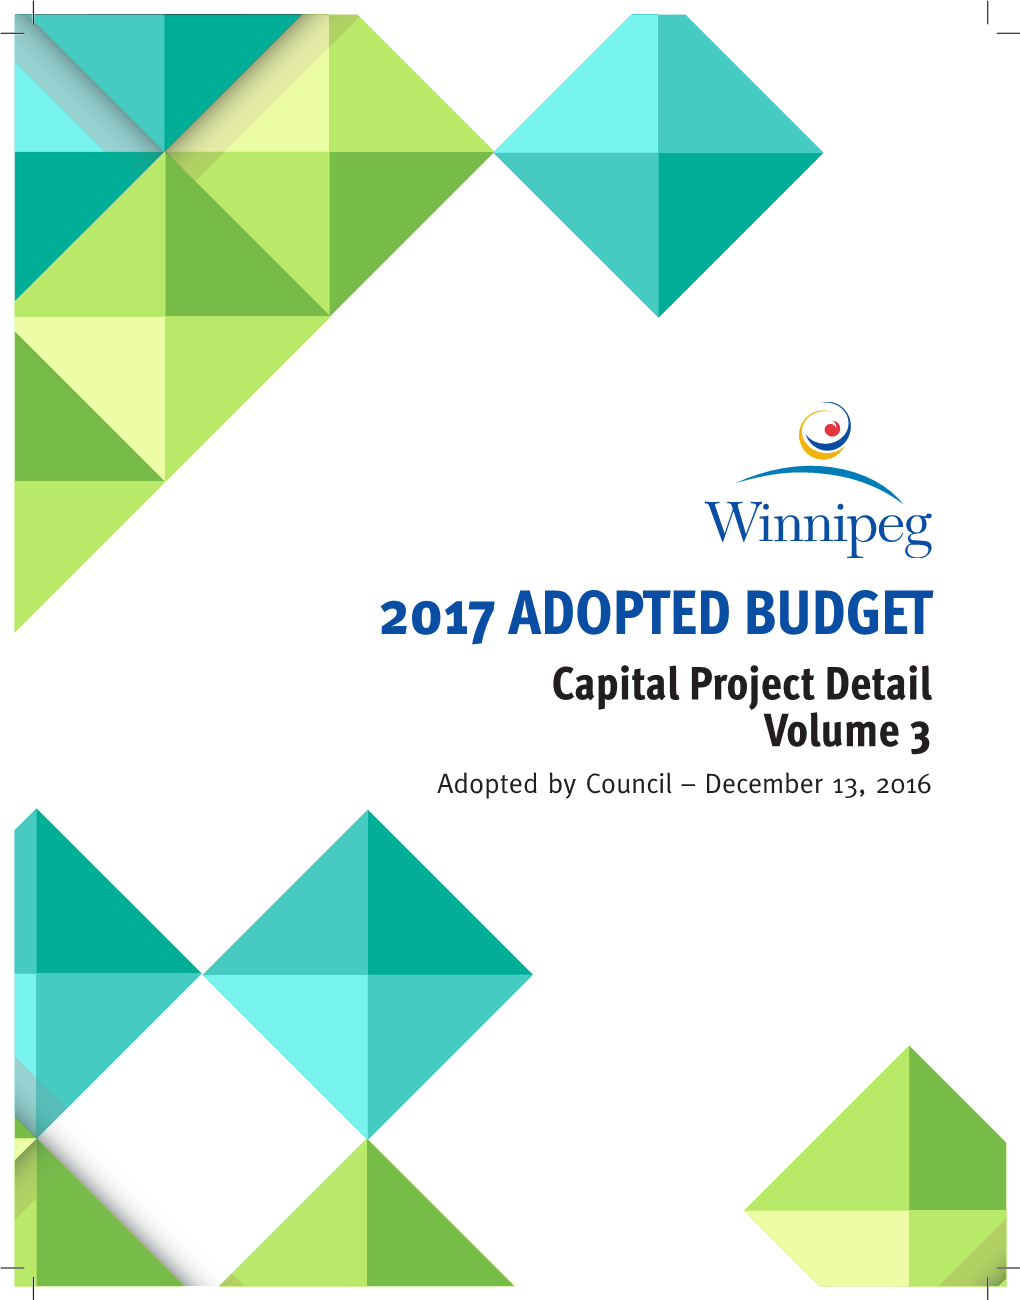 2017 ADOPTED CAPITAL BUDGET I 2018 to 2022 FIVE YEAR FORECAST